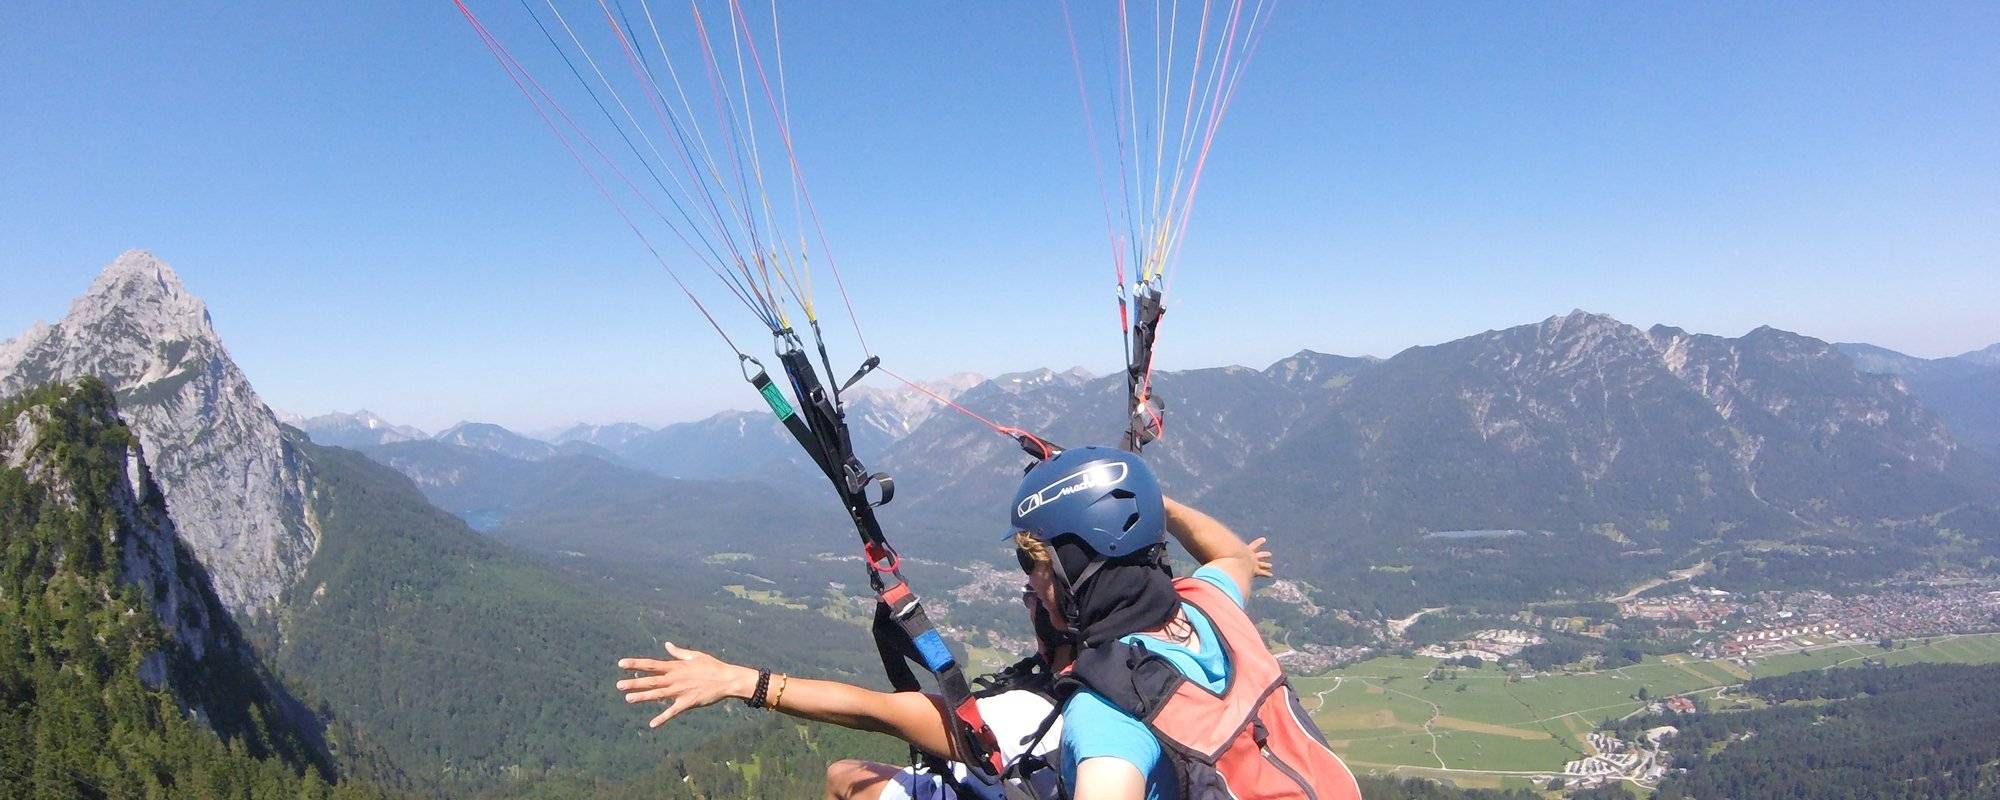 An awesome day Paragliding in the Alps of Bavaria (Fotos & Videos)